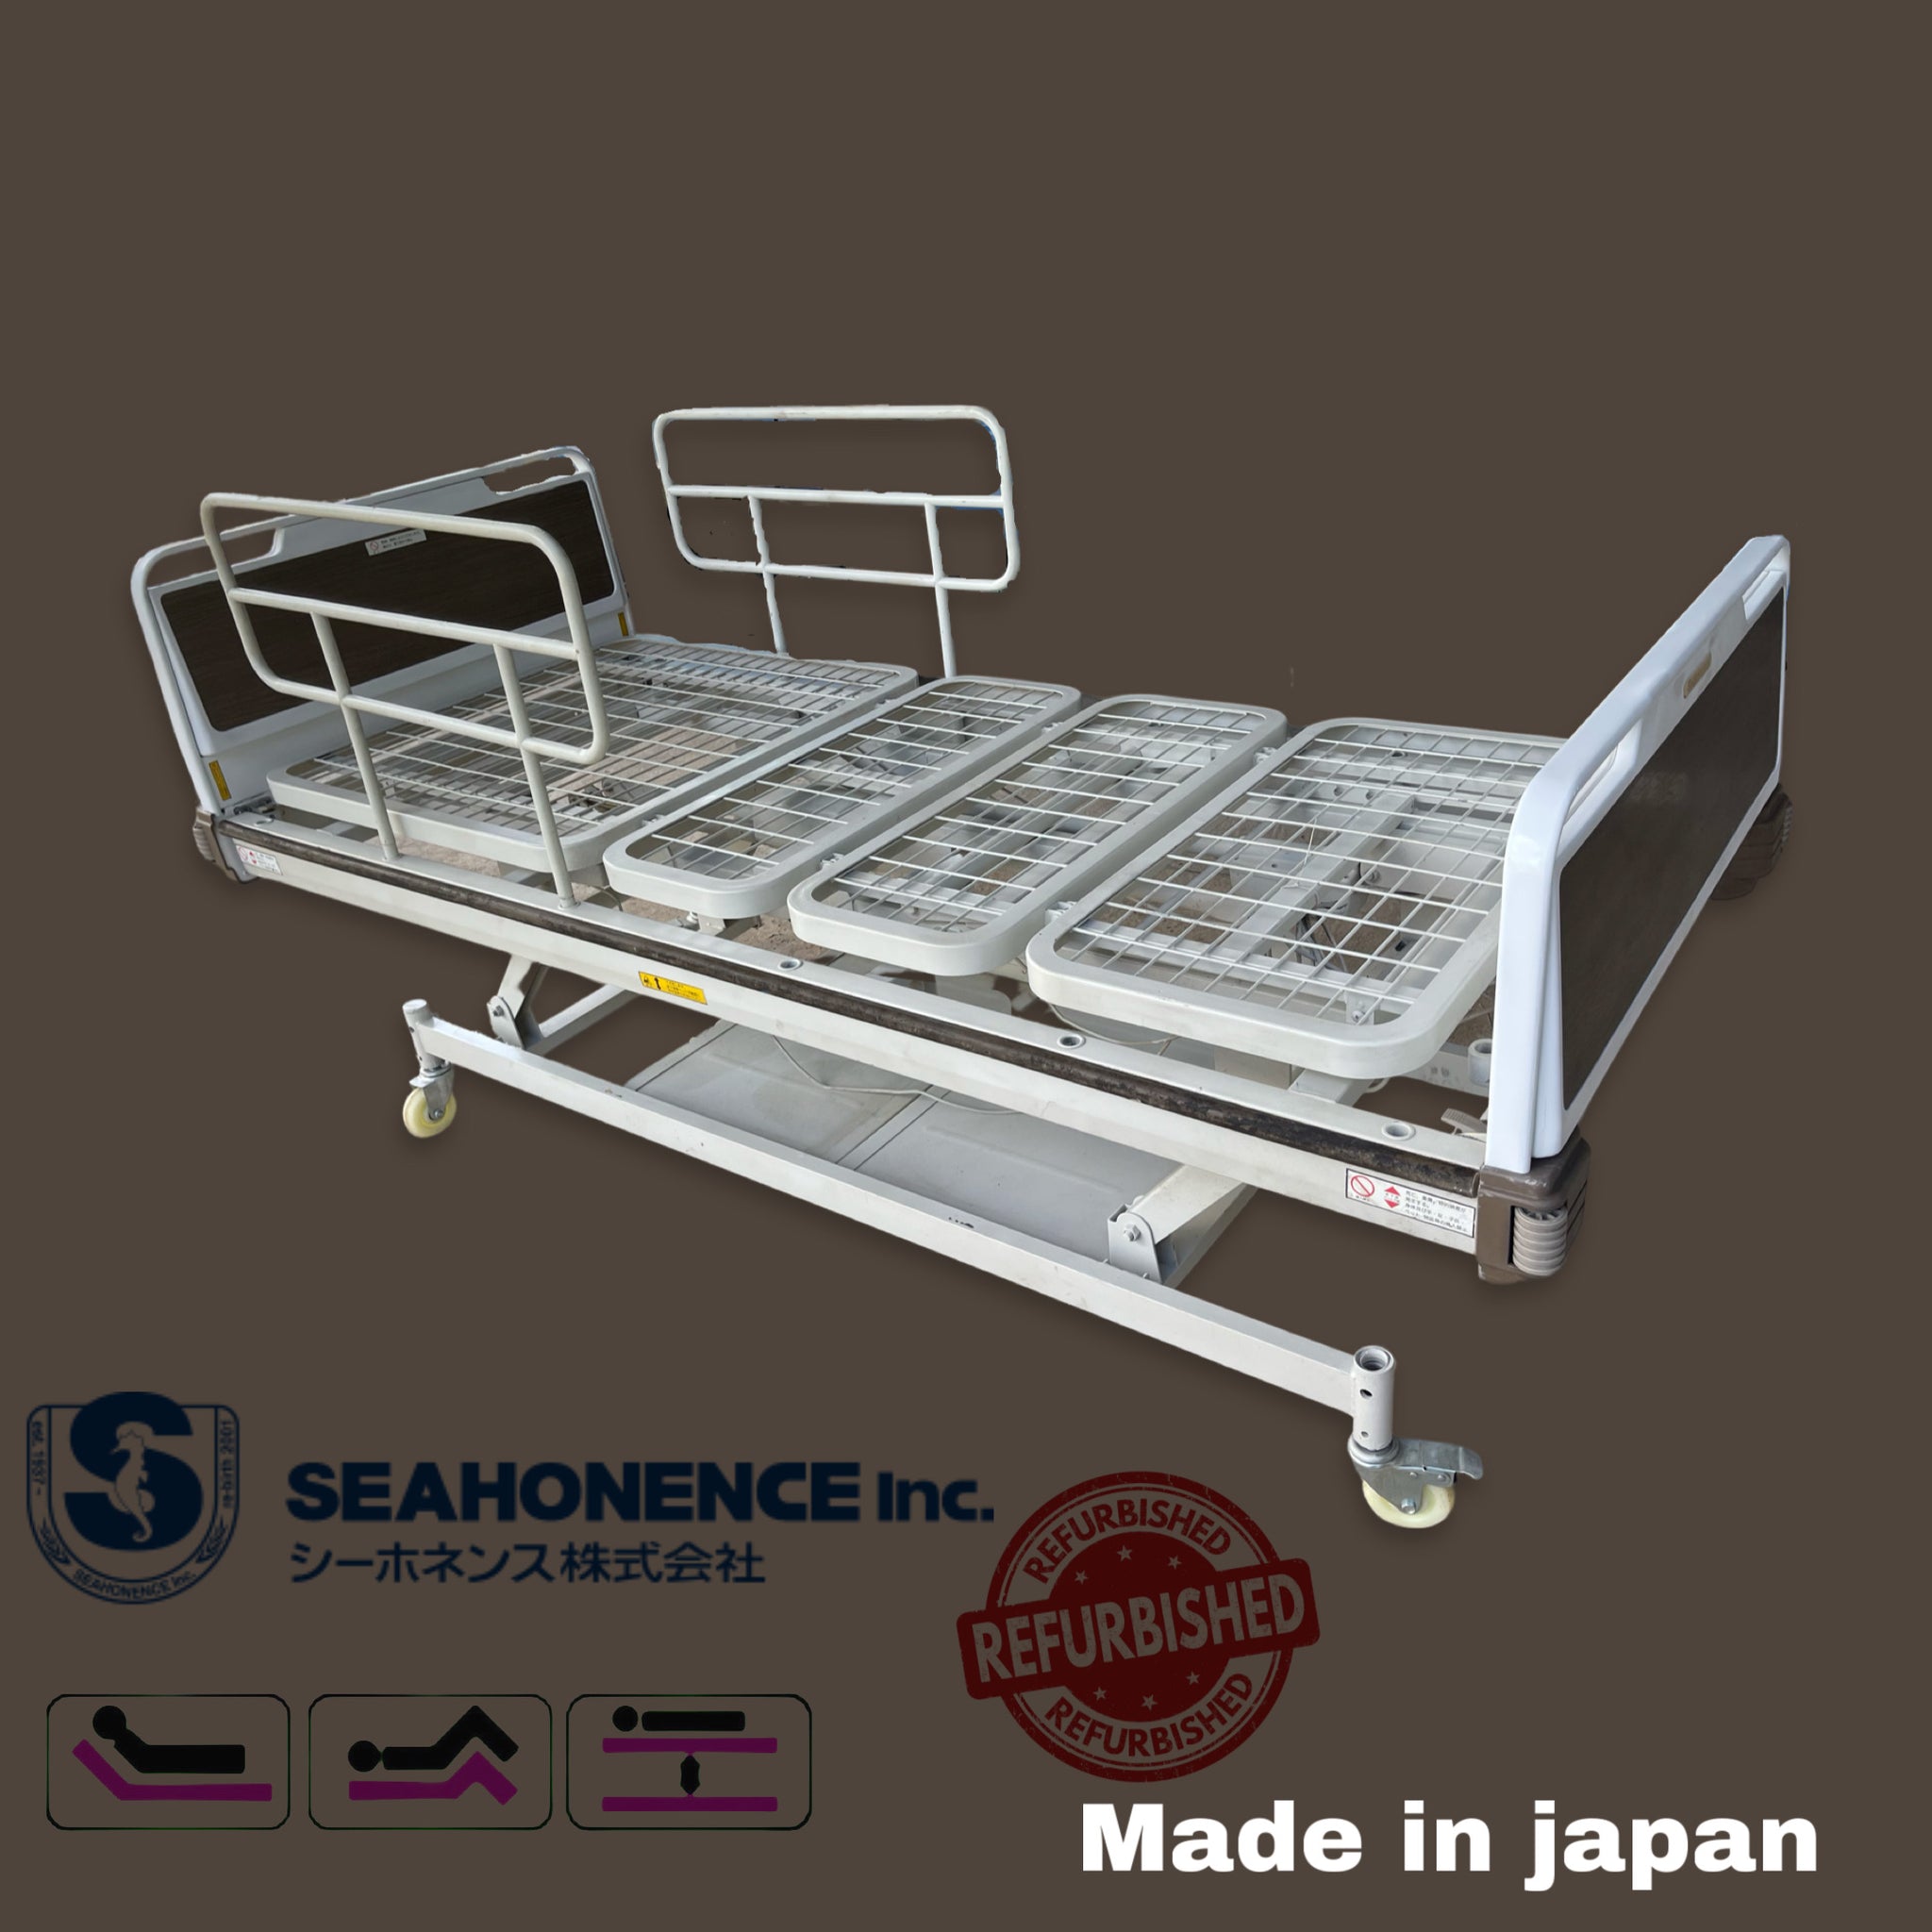 Seahonence Japanese Electric Three Function Bed (Reconditioned) (Head, Leg & Height Adjustable)